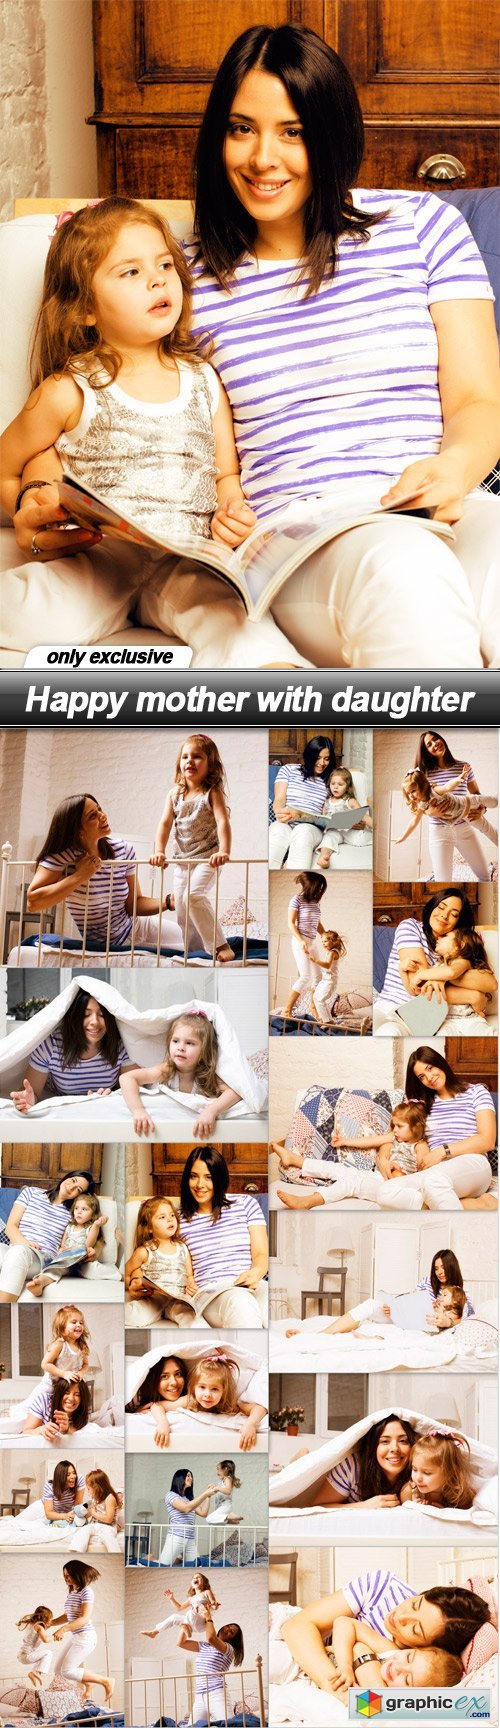 Happy mother with daughter - 18 UHQ JPEG